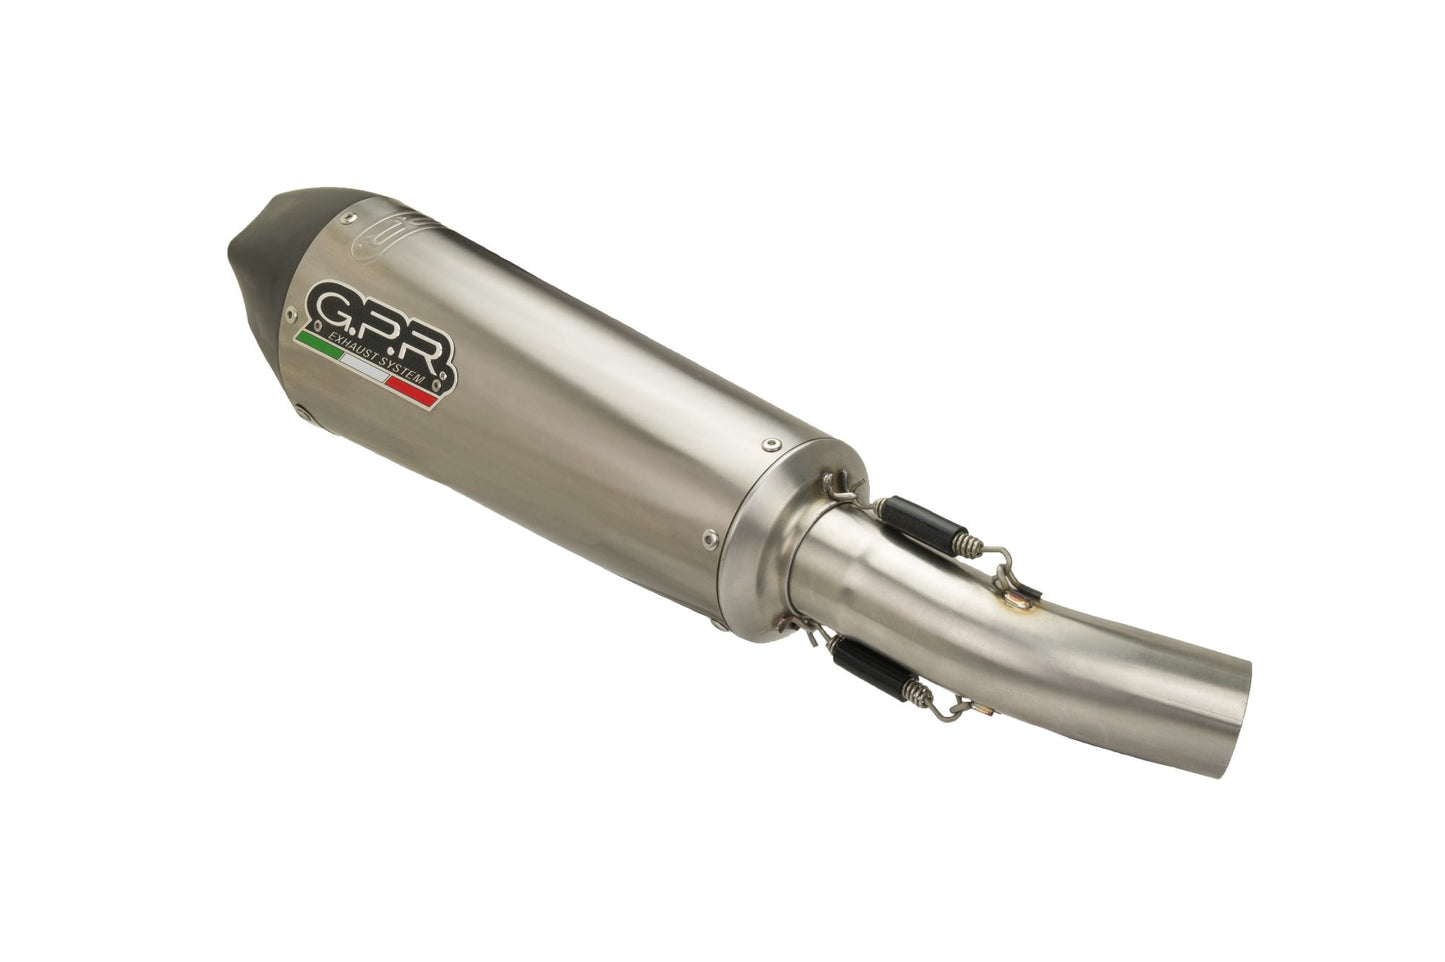 GPR Exhaust for Bmw K1300S K1300R 2009-2014, Gpe Ann. titanium, Slip-on Exhaust Including Removable DB Killer and Link Pipe